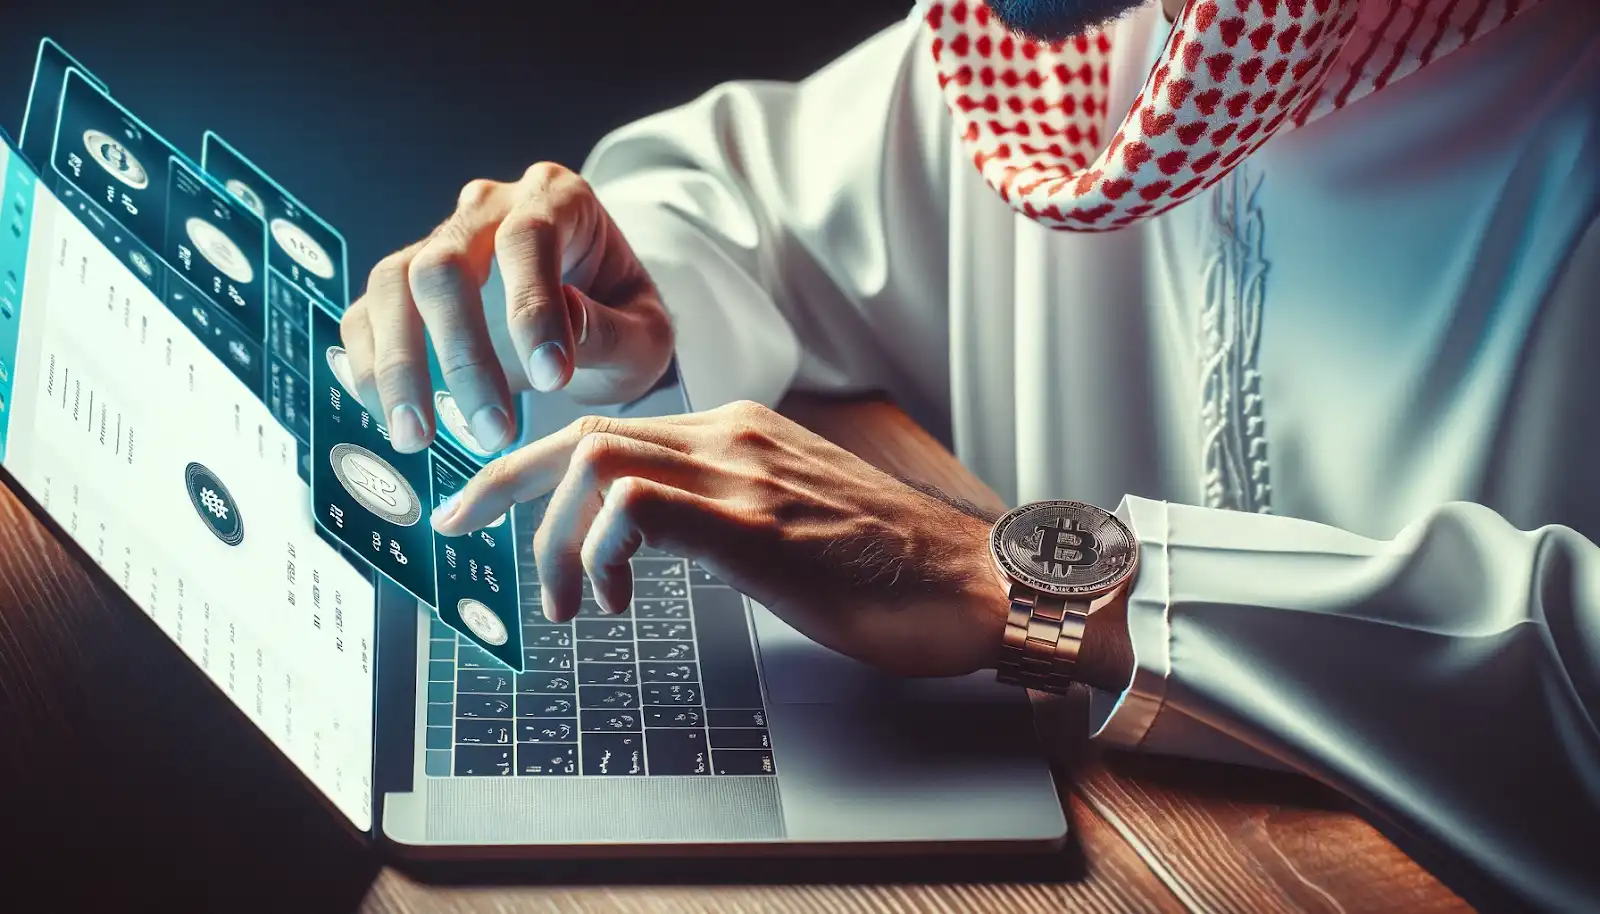 Emirati Sheikh scrolling and buying digital assets on his laptop.